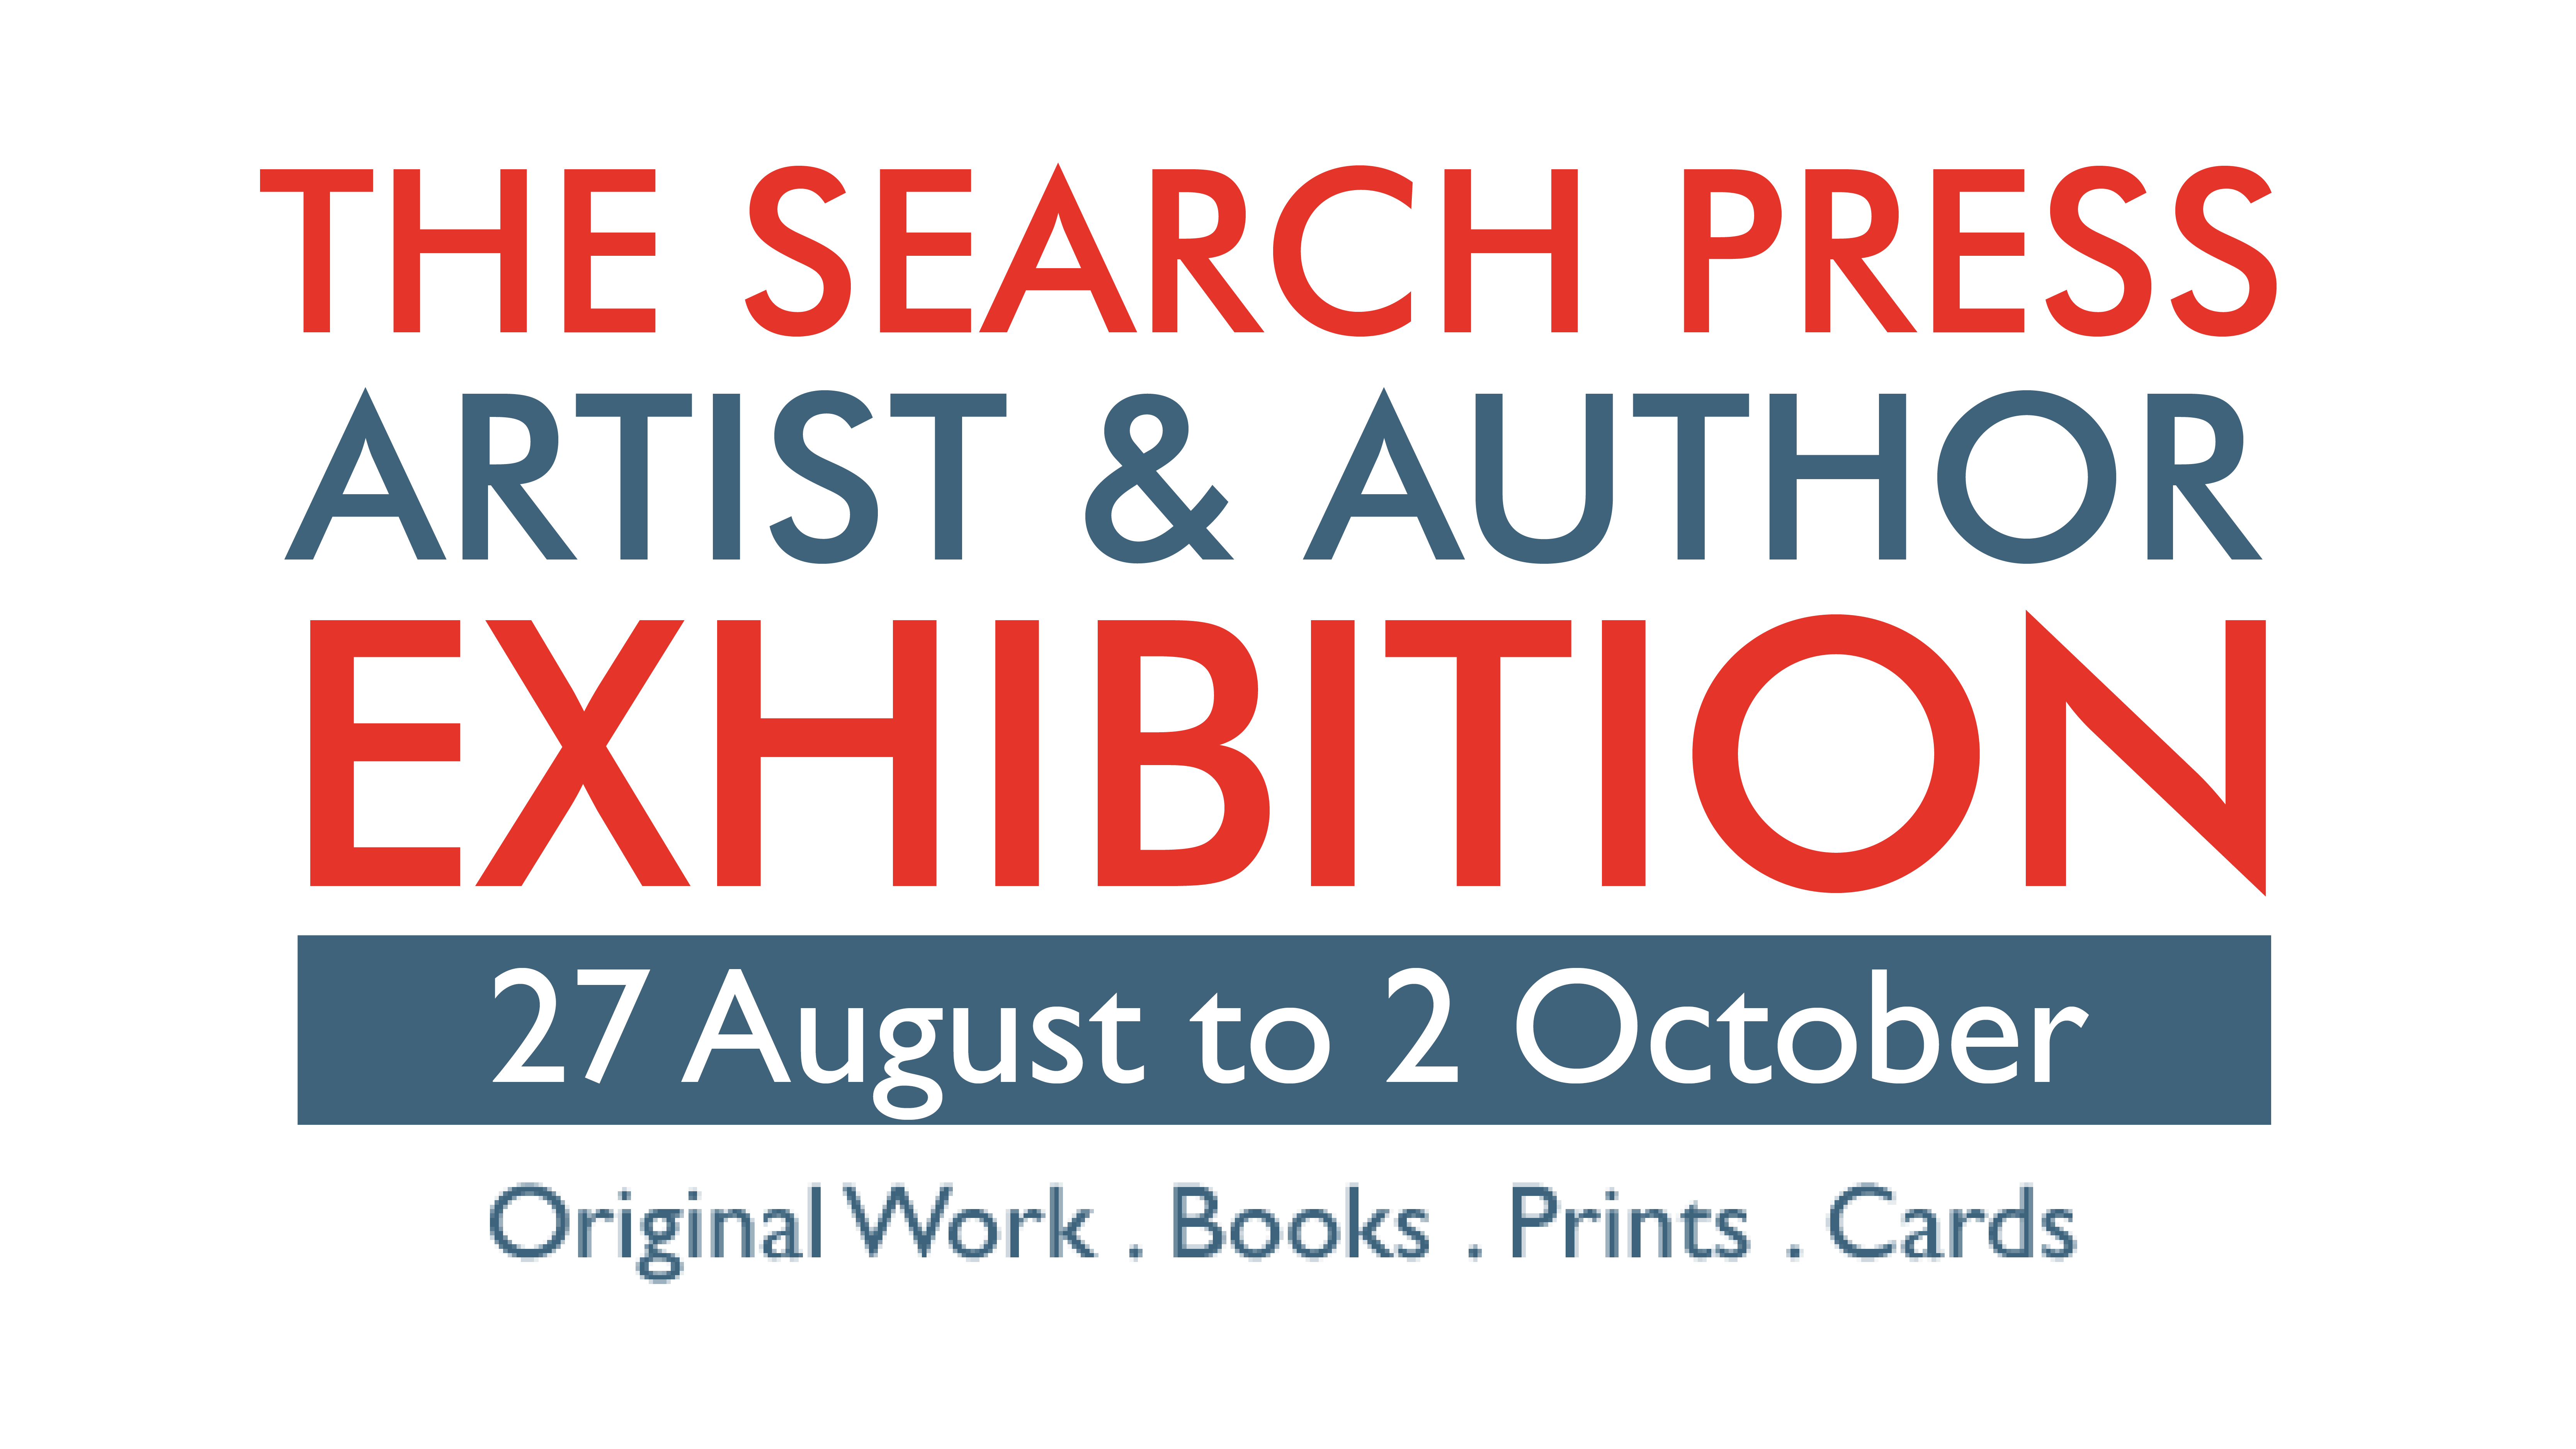 The Search Press Artist & Author Exhibition